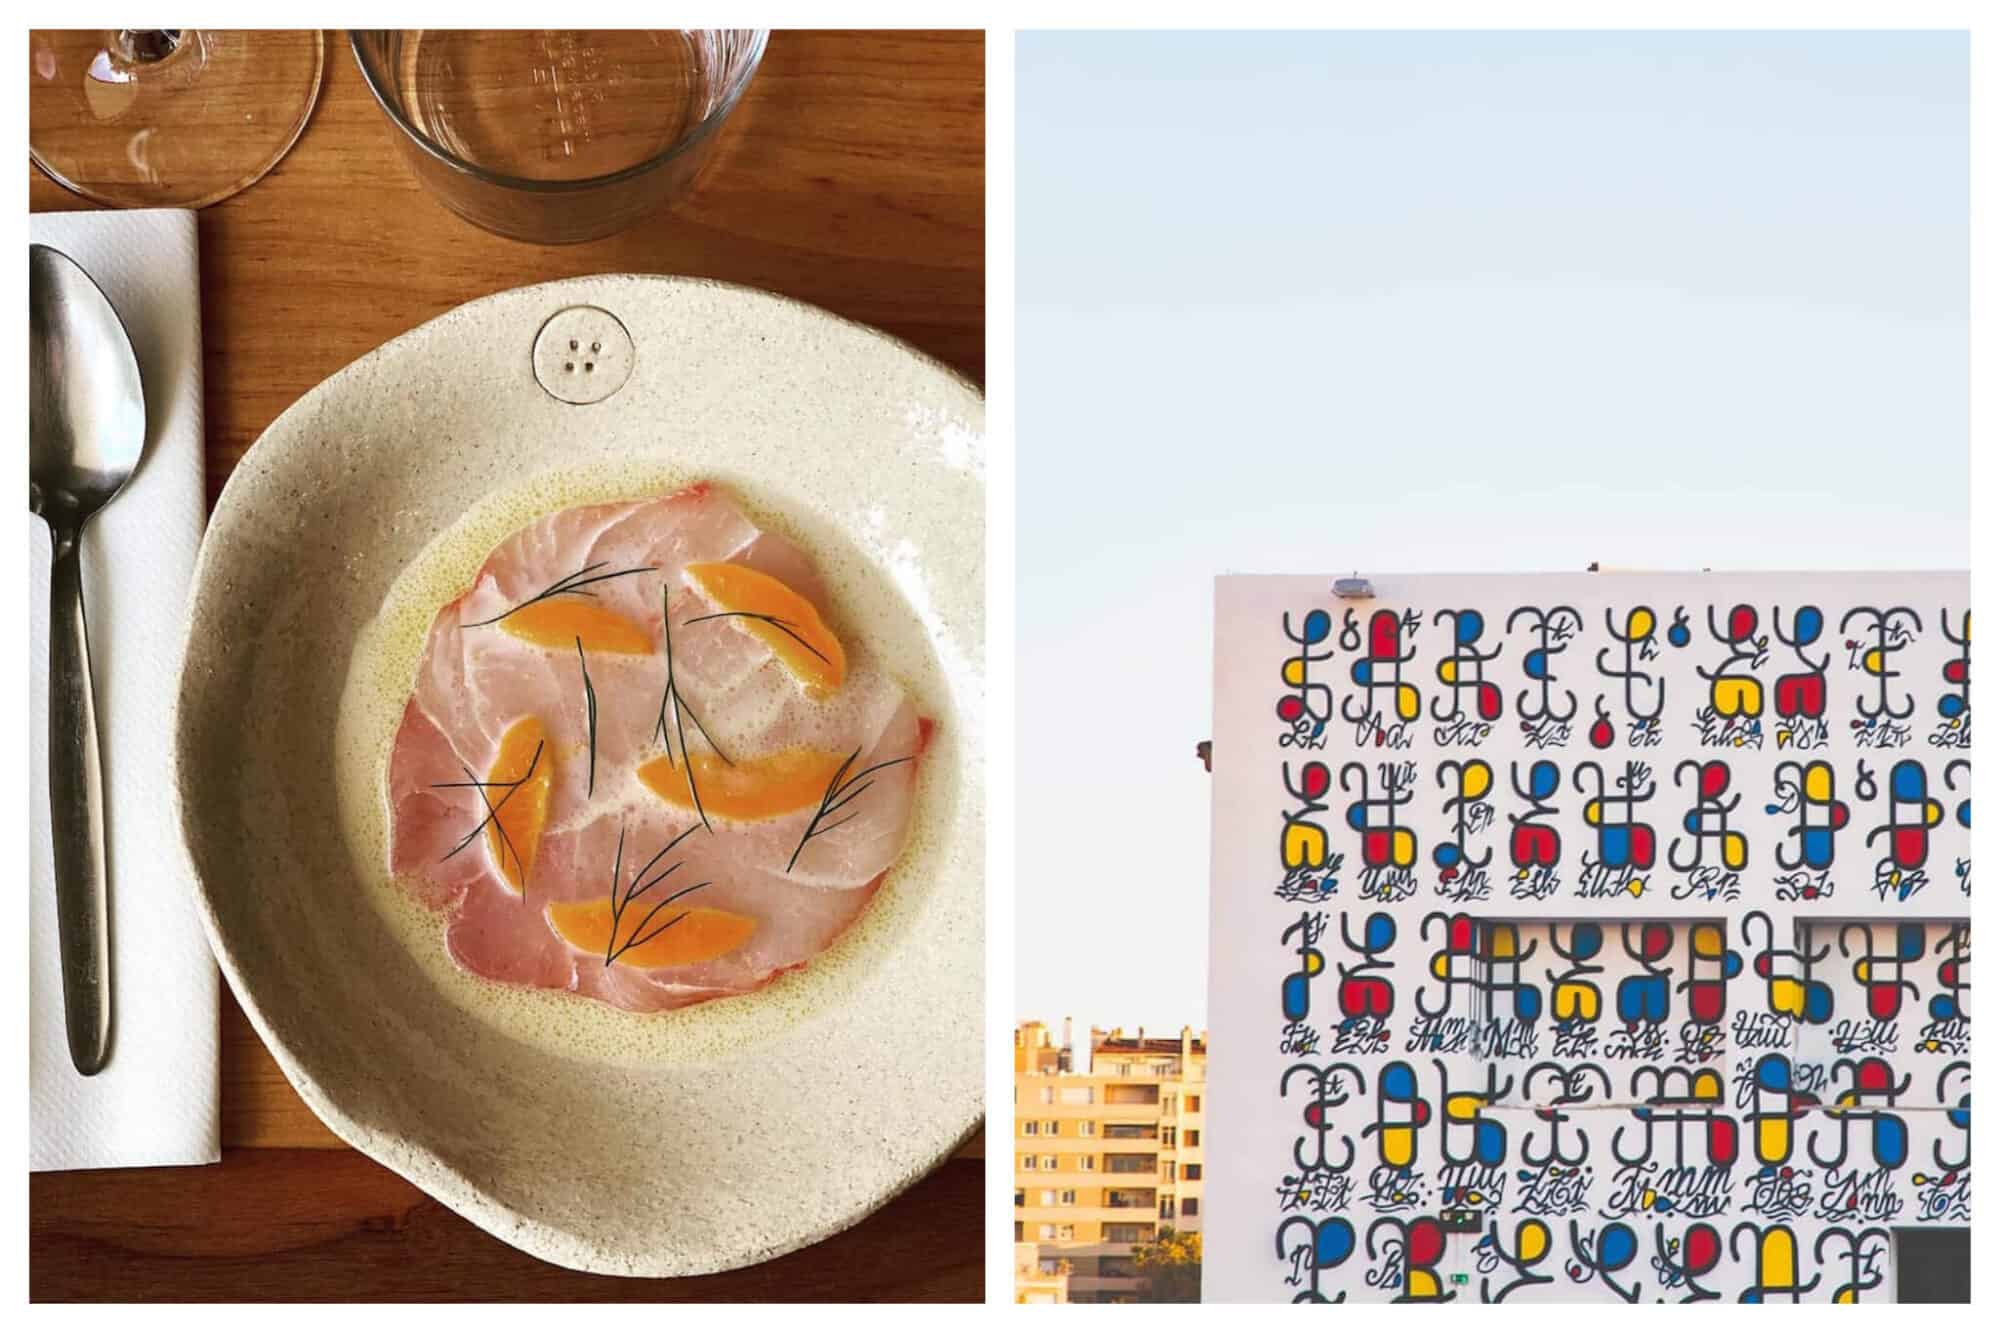 A fancy plated dish of gastronomy at La Mercerie: some sort of fish tarter with orange segments sat atop and sprigs of herbs. On the right is a colourful mural  of abstract figures which seem to represent persons and how they interact in the community.